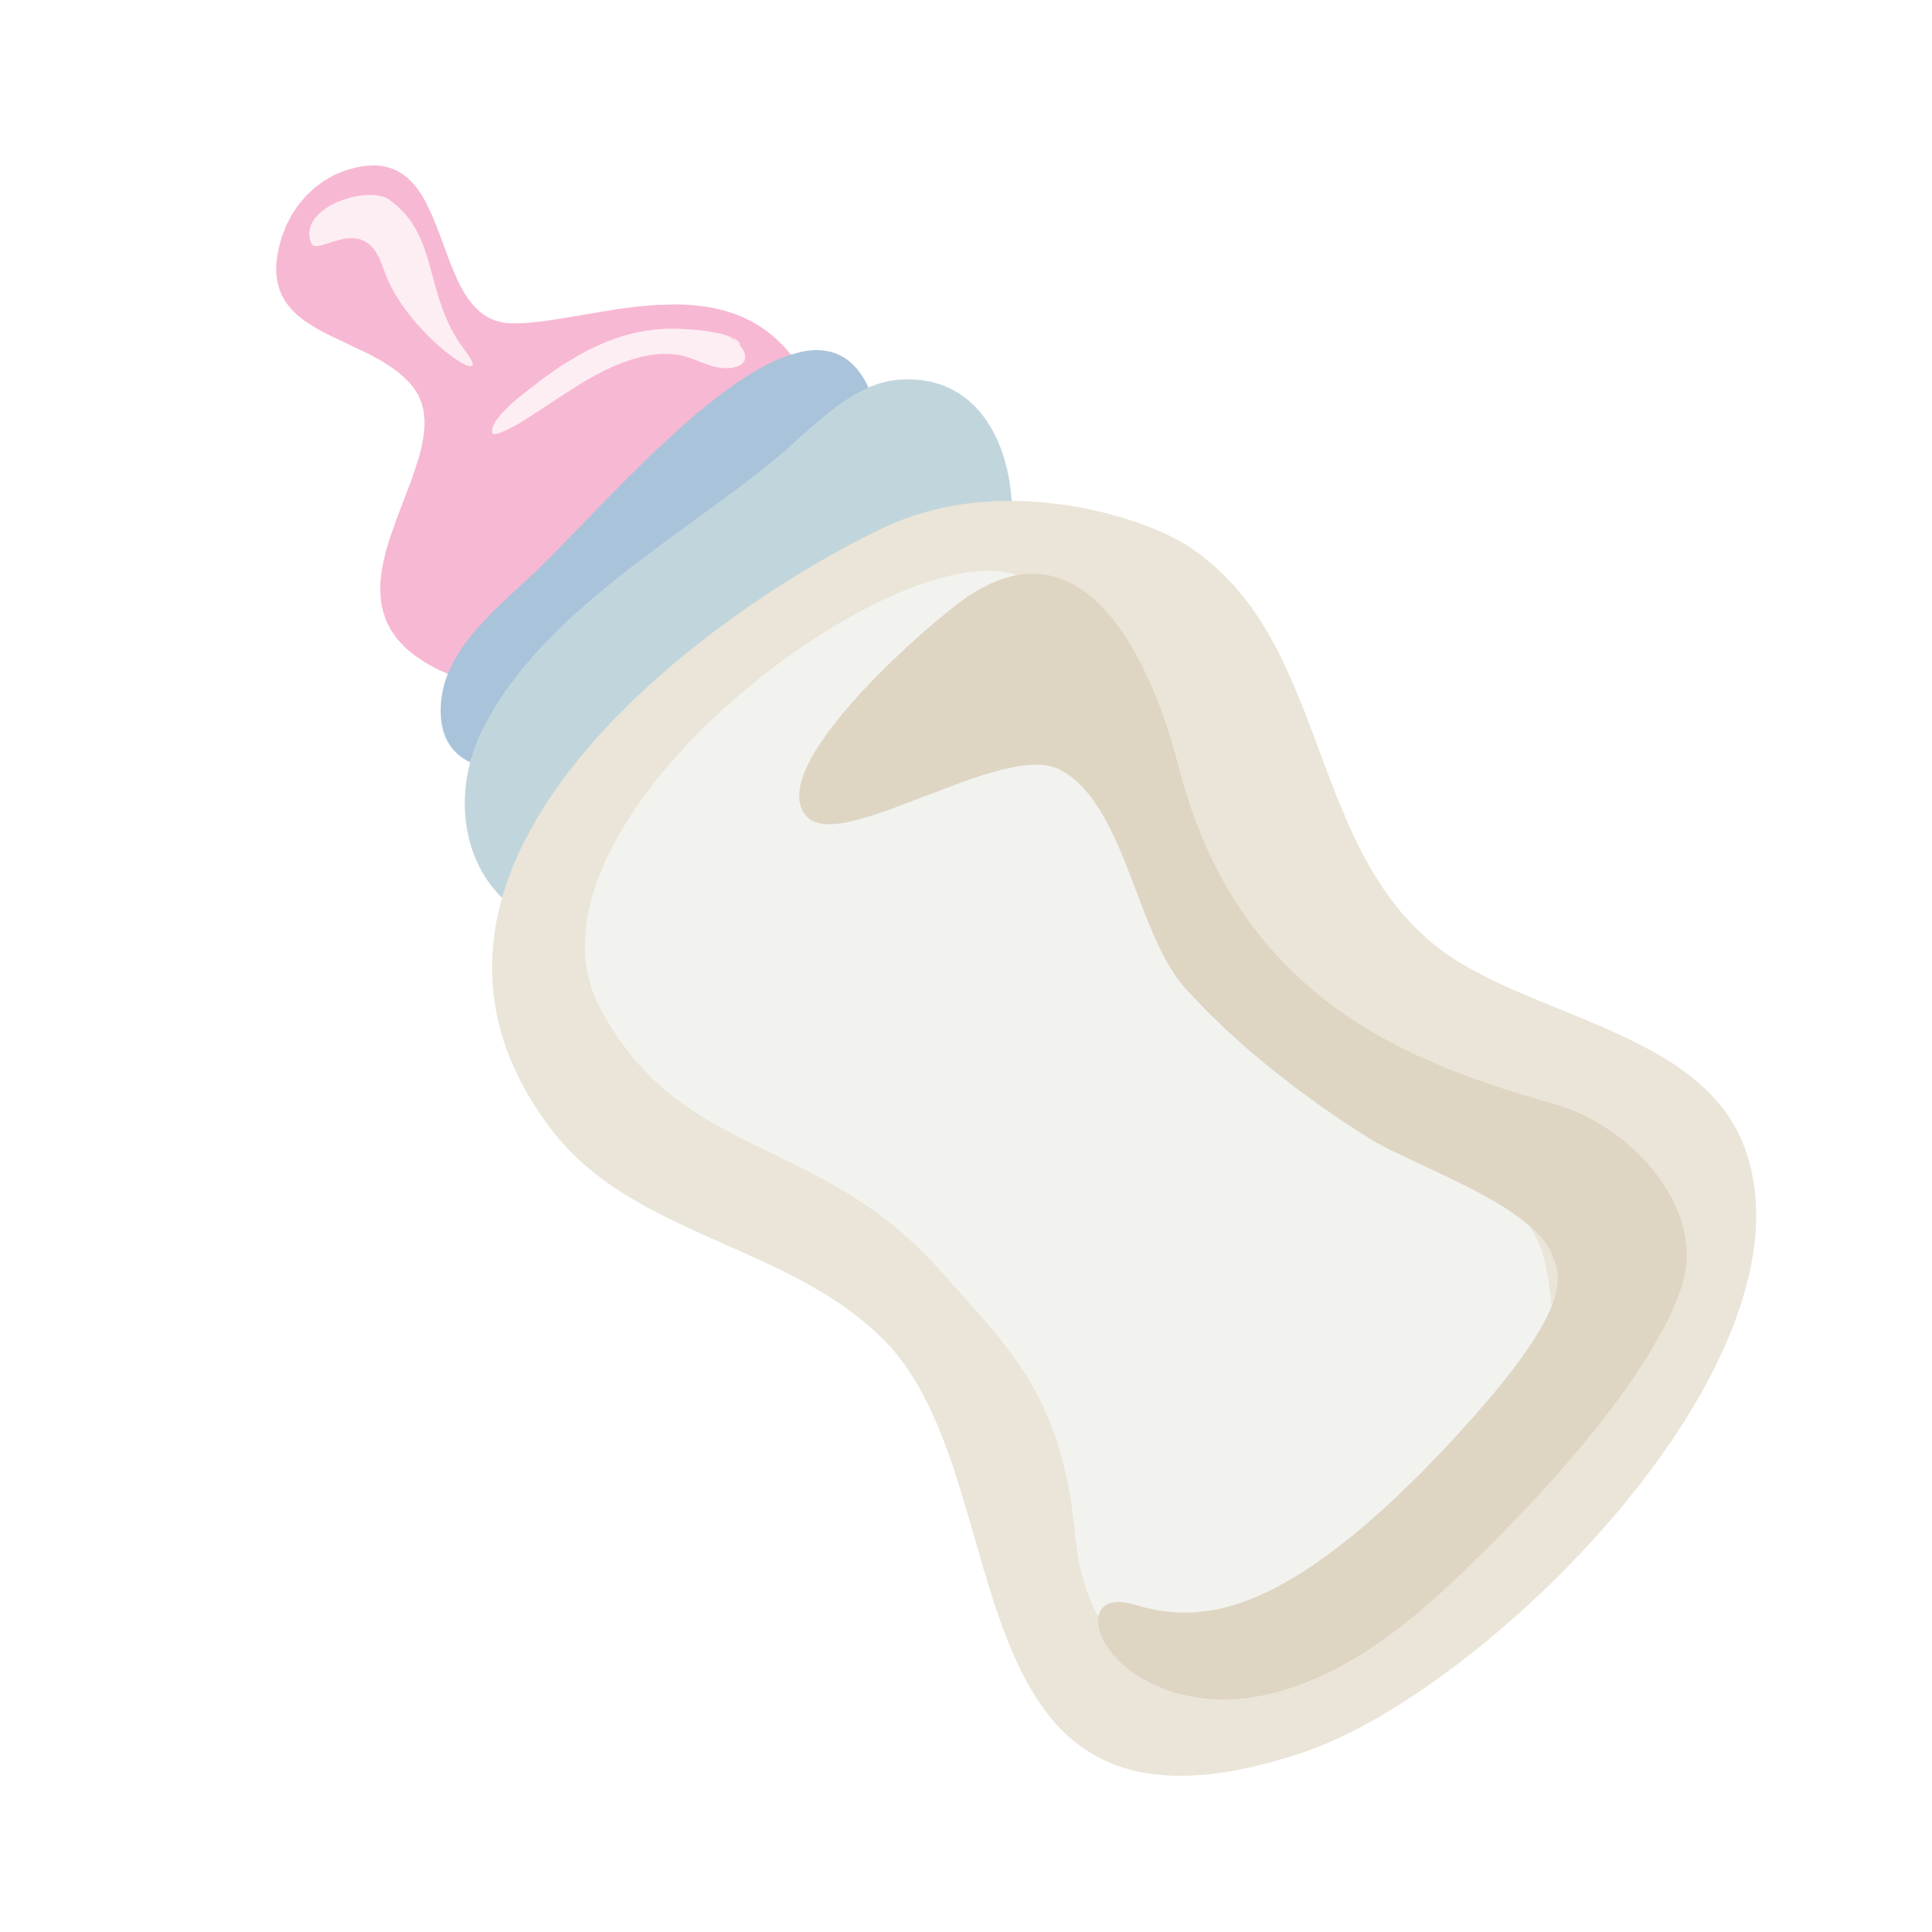 Baby Bottle Png Image Transparent Image Download Size 2301x2301px